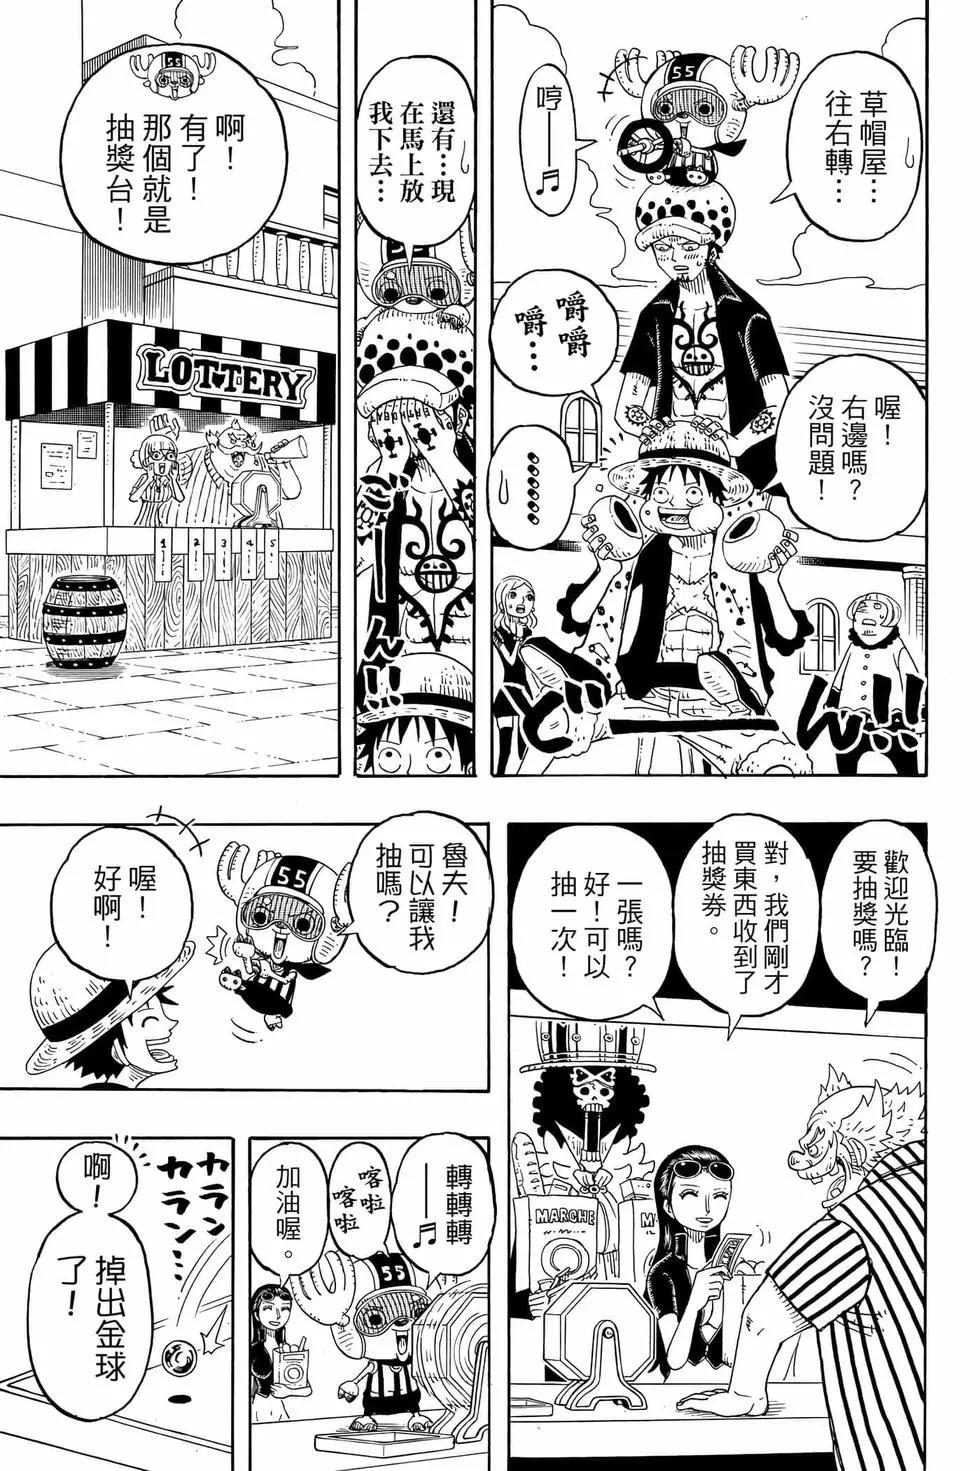 One piece party - 第04卷(1/4) - 4